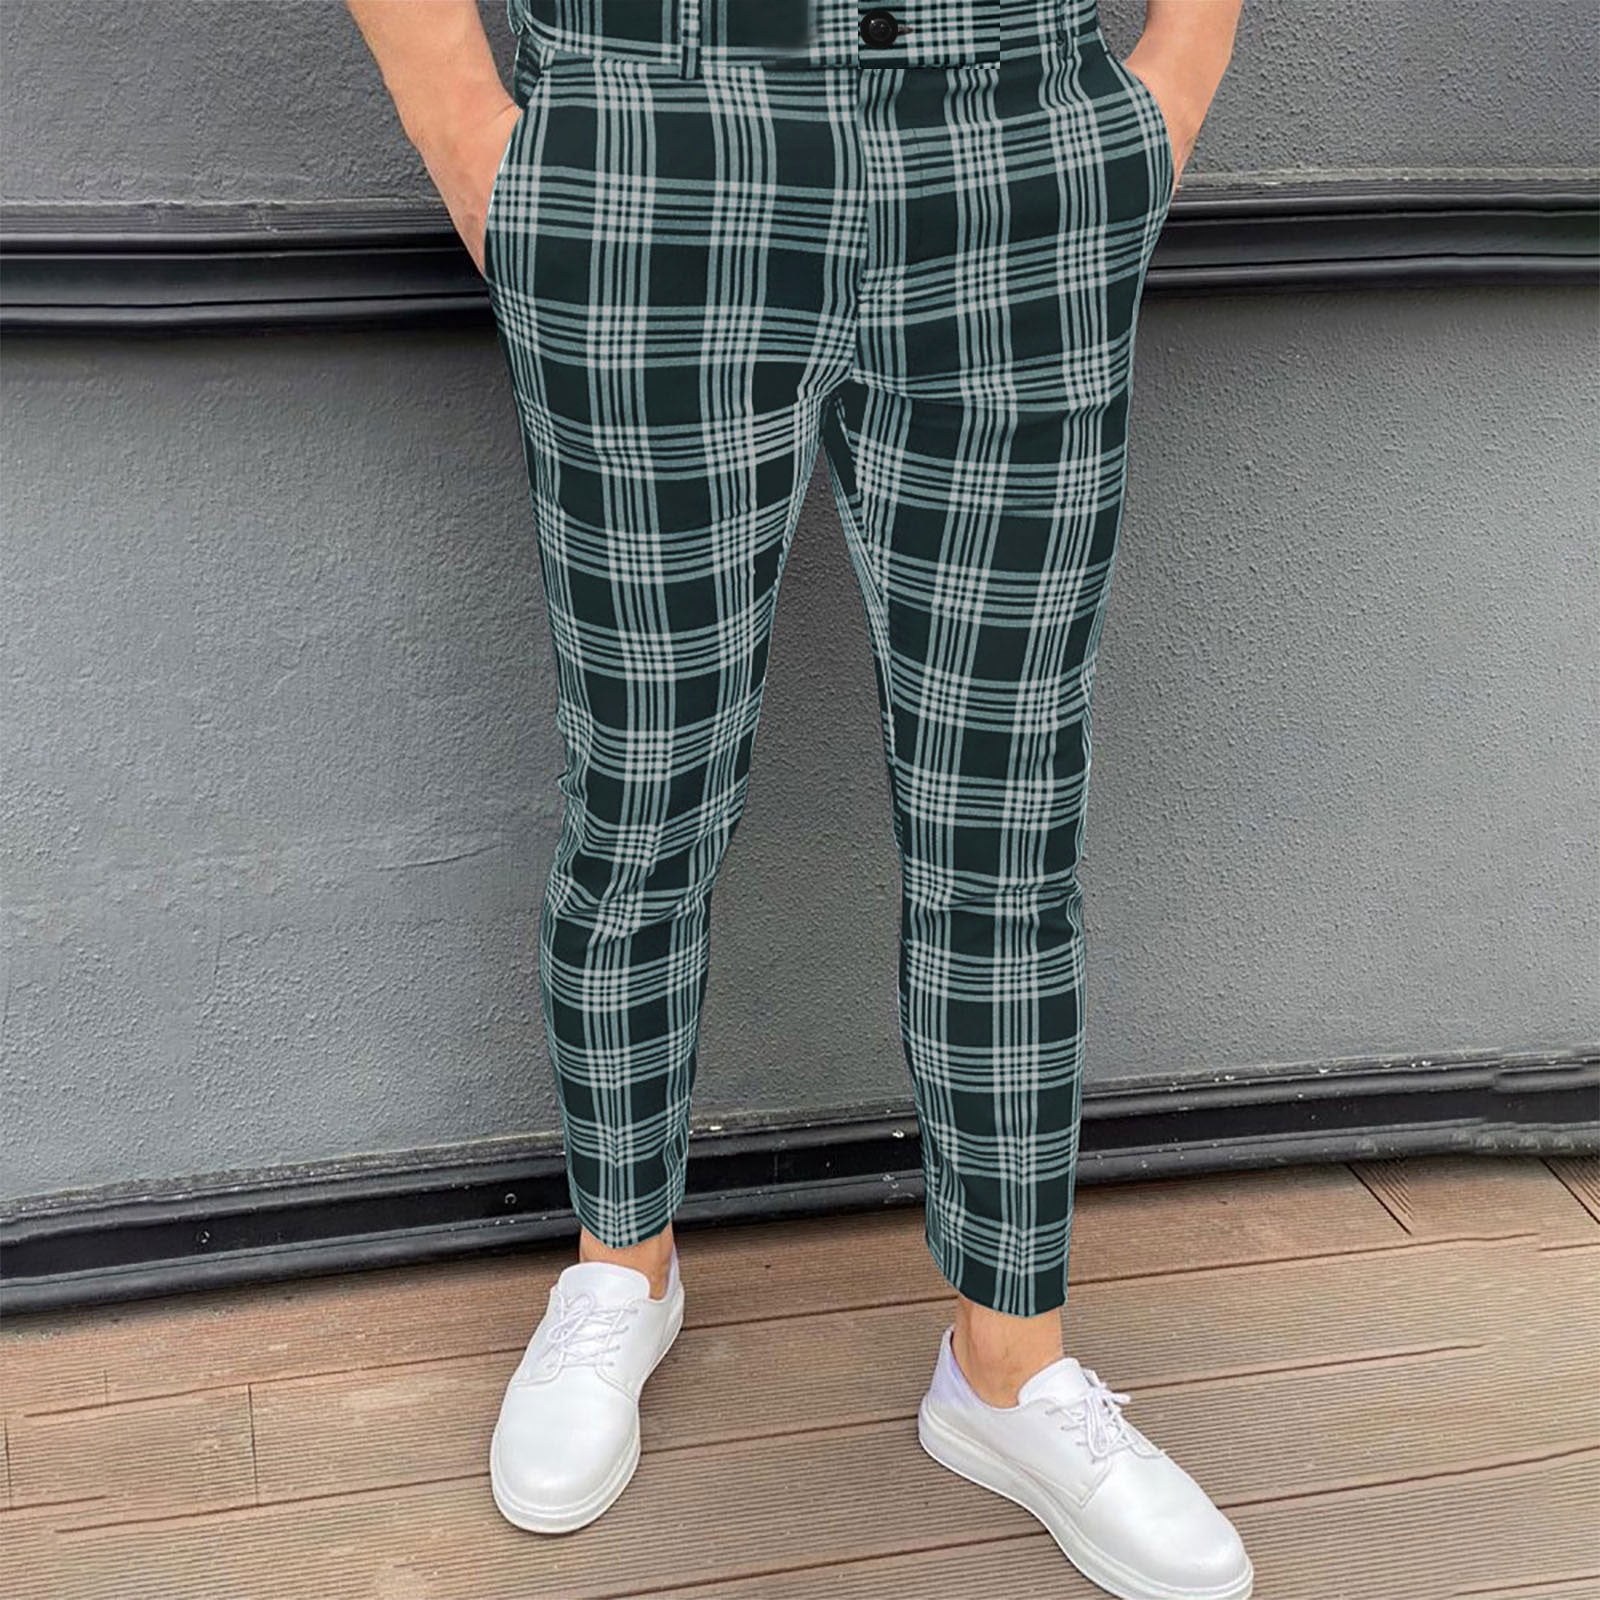 DIYAGO Pencil Pants for Men Stylish Work Vintage Long Casual Printed Suit Pants  Pants Slim Fit Fashion Plaid Striped Designer Skinny Trousers Cheap Western  Office Business Pants with Pockets at Amazon Men's